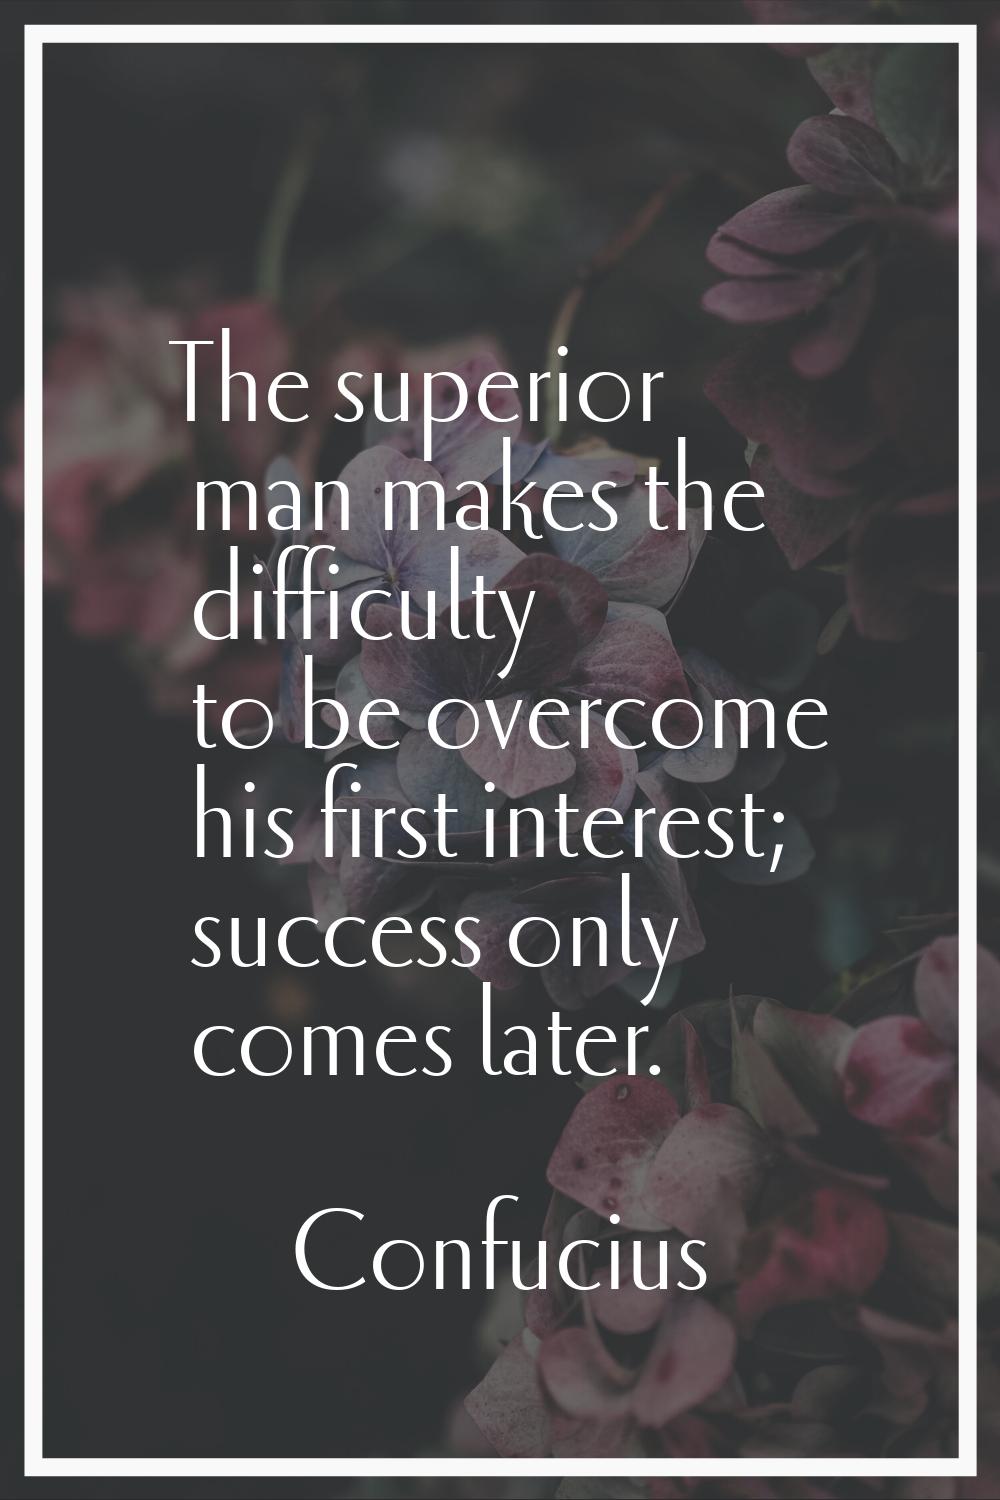 The superior man makes the difficulty to be overcome his first interest; success only comes later.